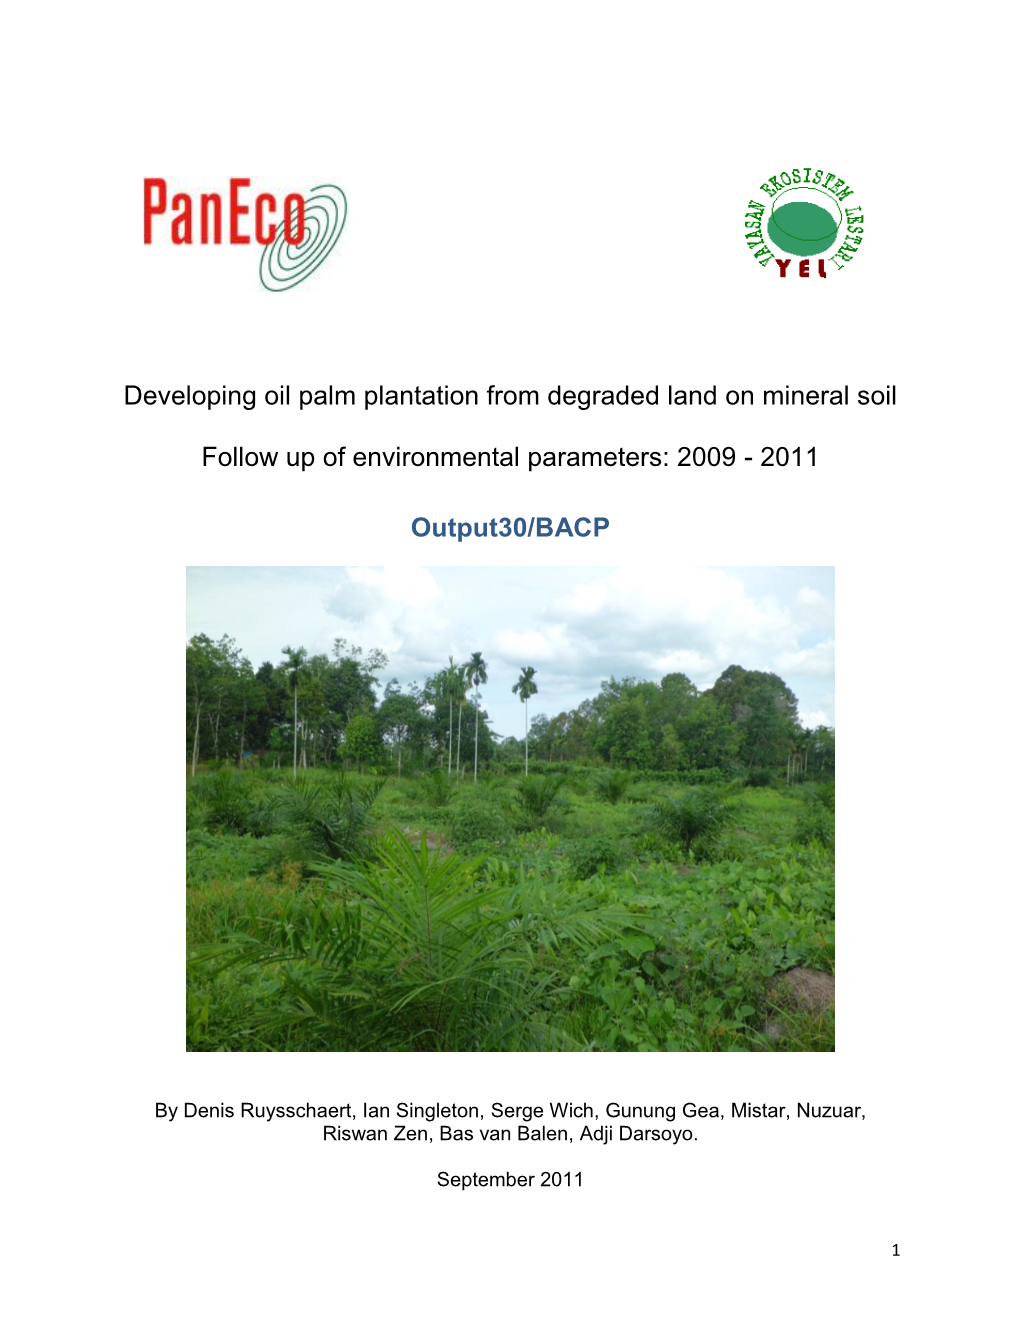 Developing Oil Palm Plantation from Degraded Land on Mineral Soil